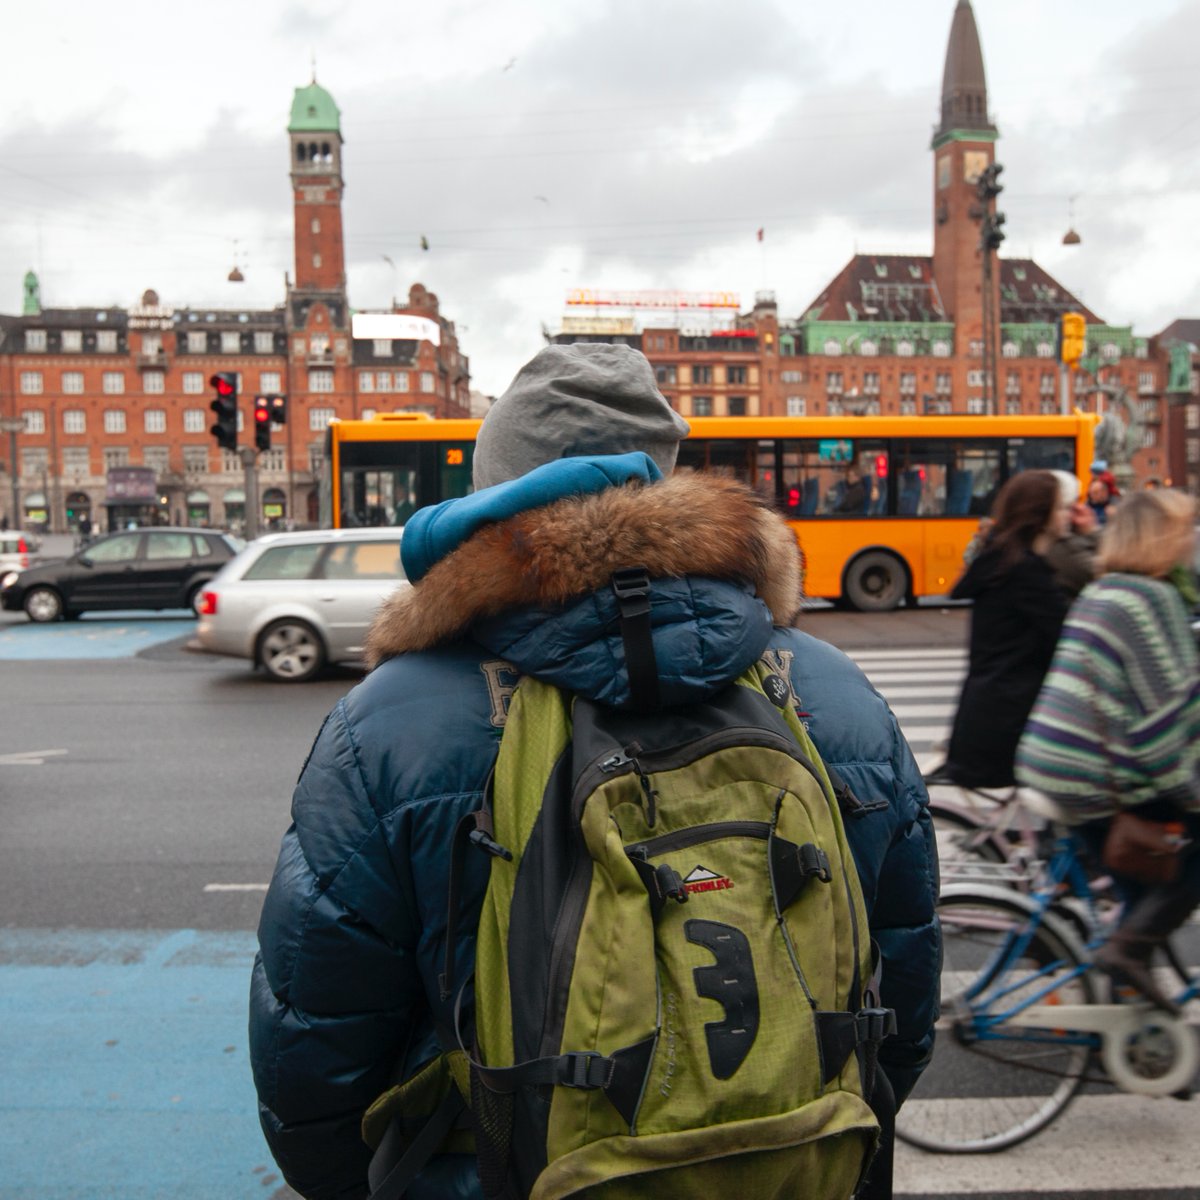 Leaders of a small church plant in Copenhagen seek to make disciples in a challenging, dark culture. 🙏 Pray for endurance as they build up new, unchurched believers as they face much apathy. 🙏 Pray that they will remember their labor in the Lord is not in vain.